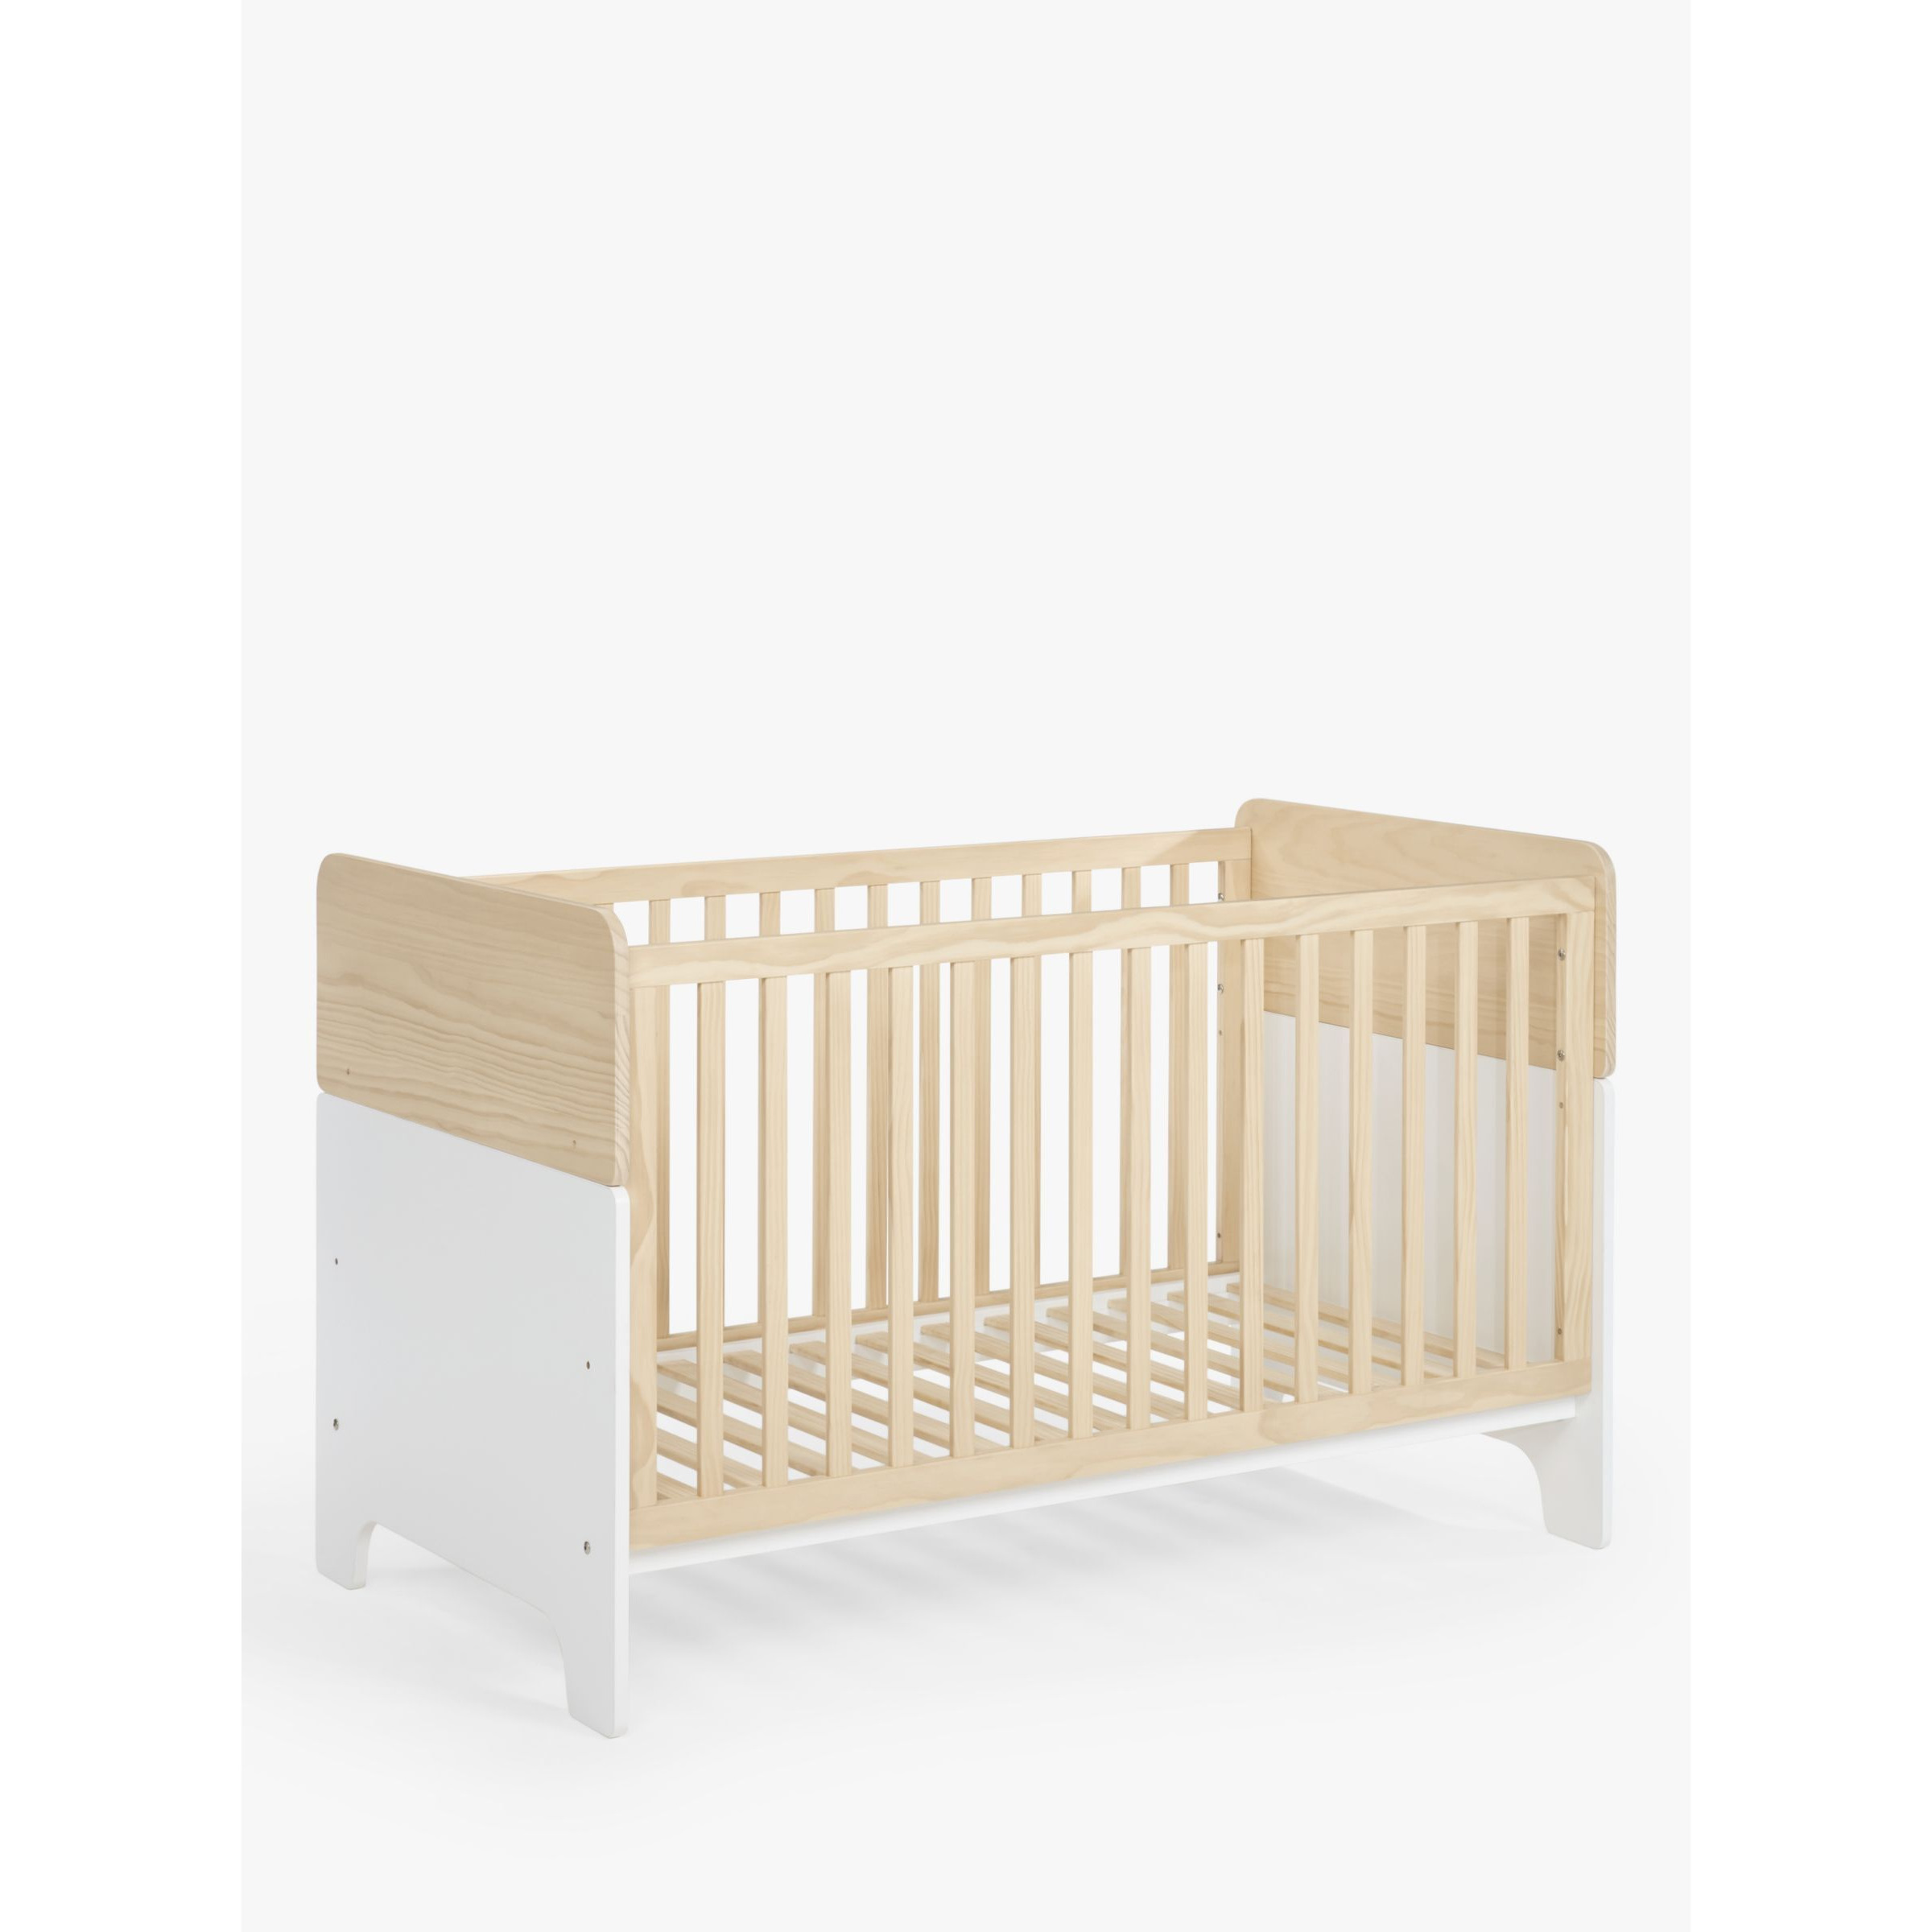 John Lewis Odin 2- in-1 Cotbed, White/Neutral - image 1